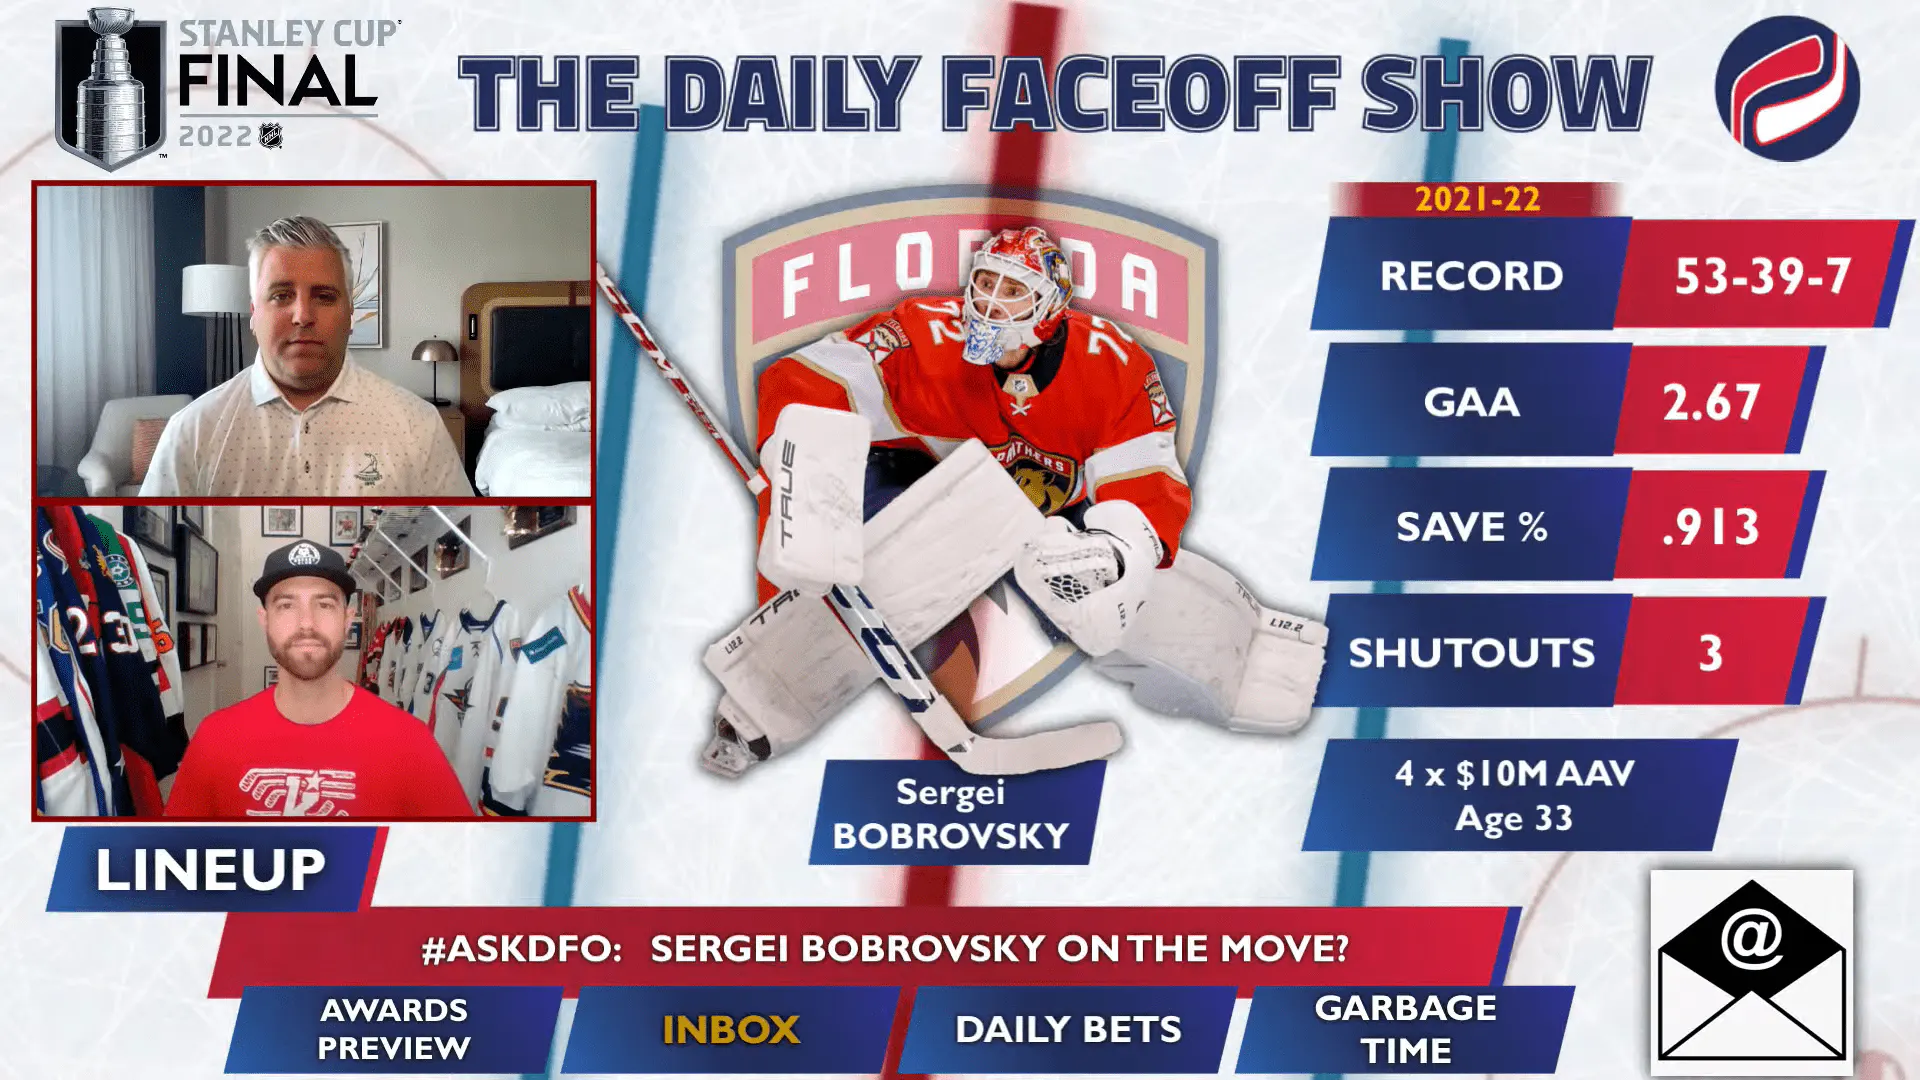 The Daily Faceoff Show: How realistic is it that Sergei Bobrovsky gets traded?